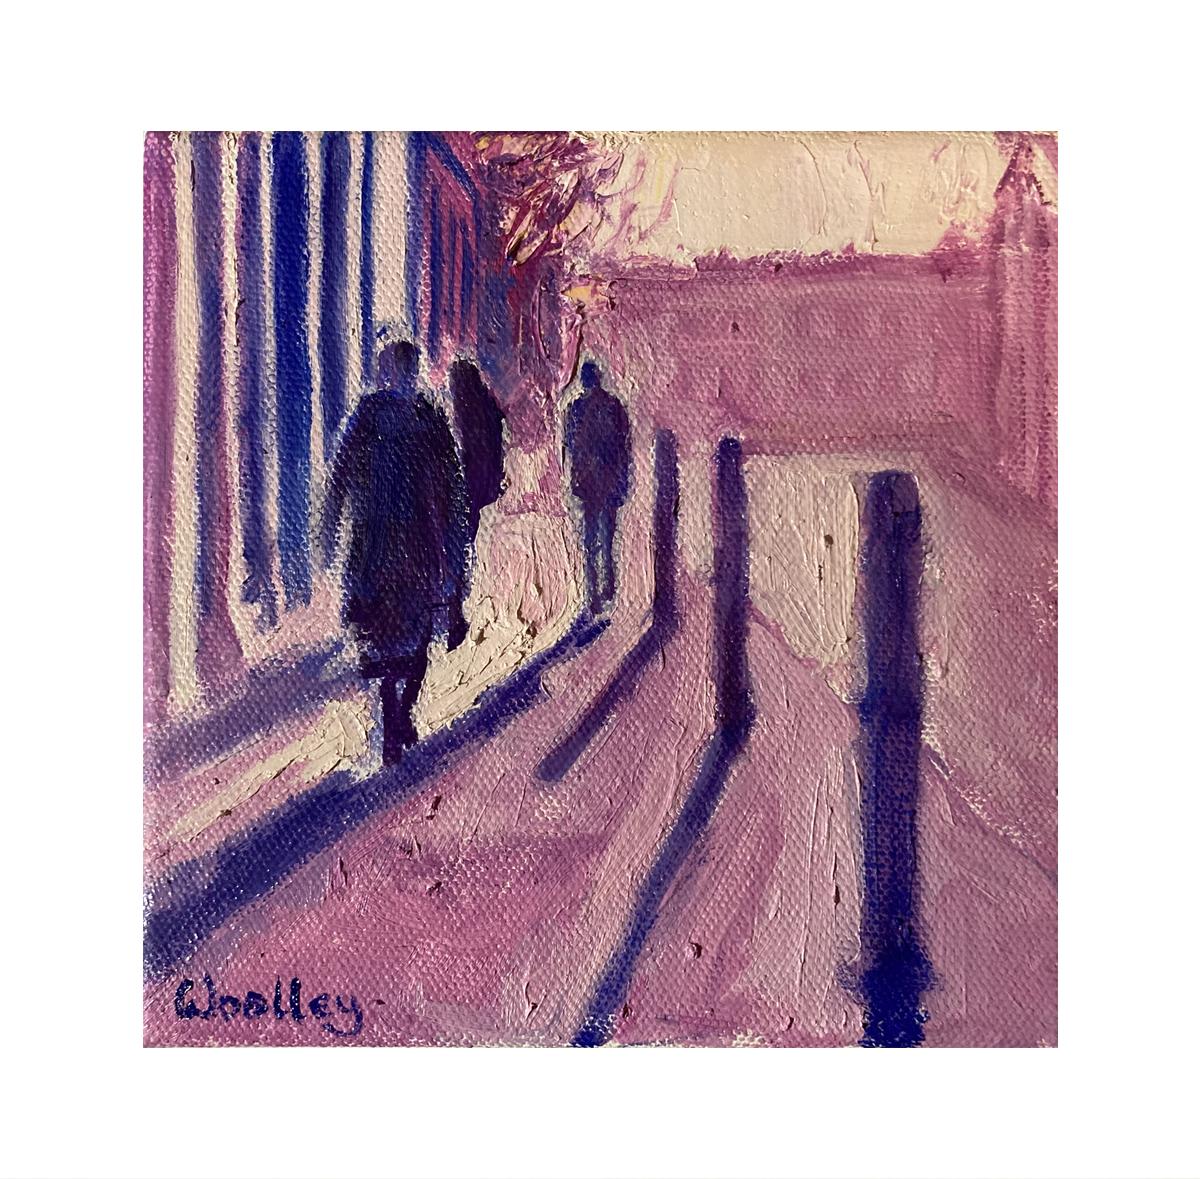 Long Winter Shadows 2 [December 2022]

original
Oil Paint on Canvas
Image size: H:15 cm x W:15 cm
Complete Size of Unframed Work: H:15 cm x W:15 cm x D:2cm
Sold Unframed
Please note that insitu images are purely an indication of how a piece may